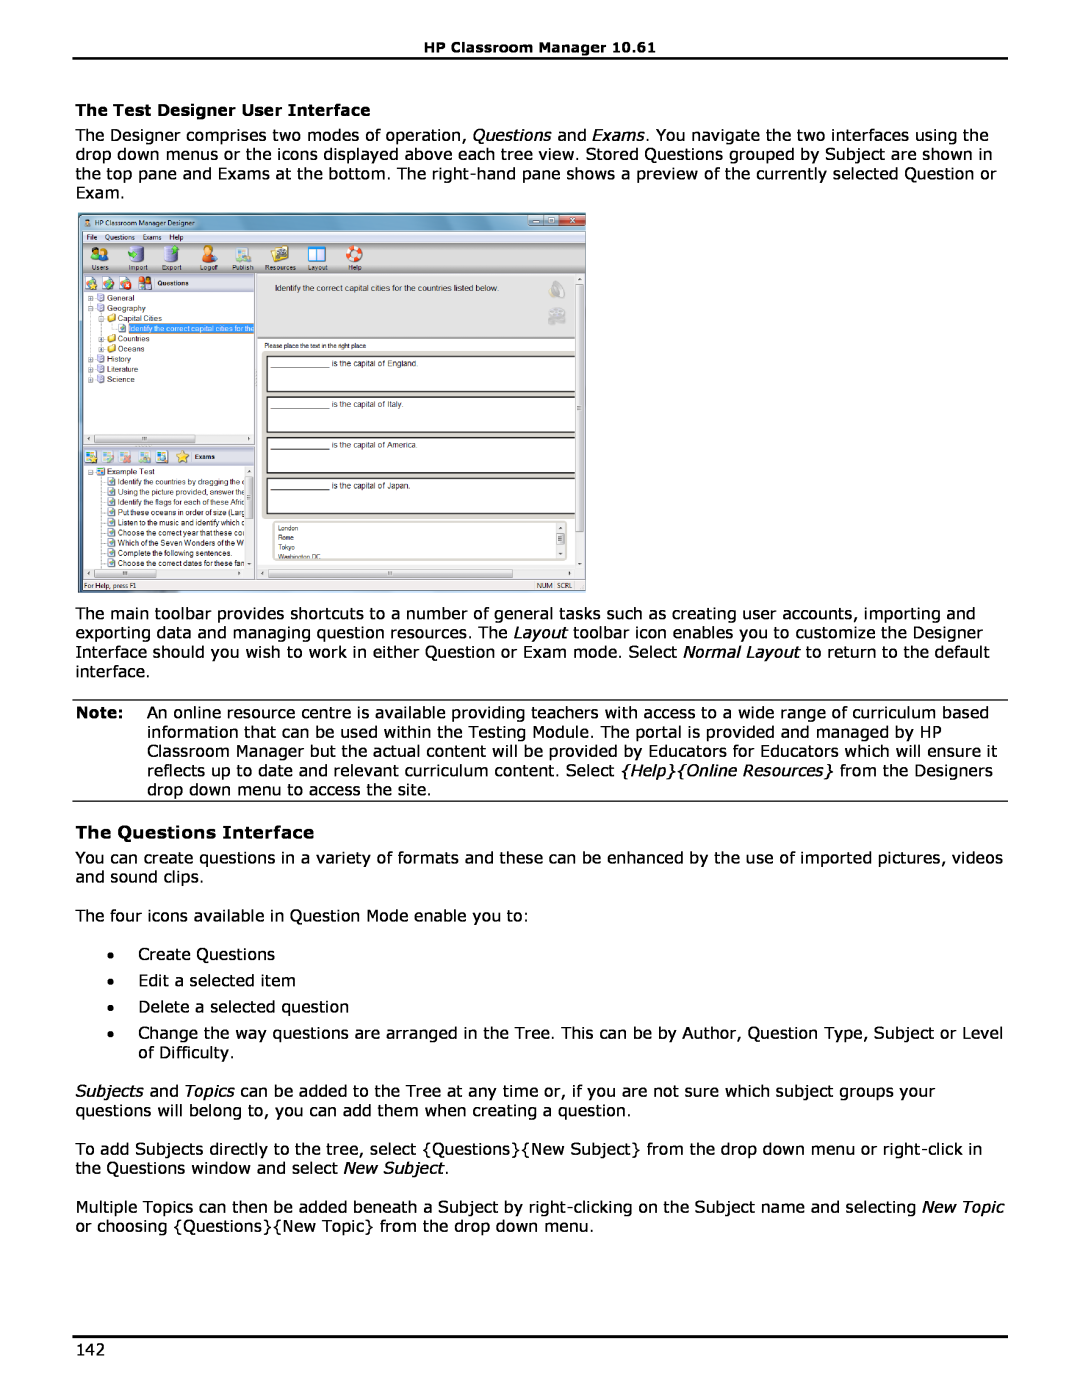 HP Classroom Manager manual The Questions Interface, The Test Designer User Interface 